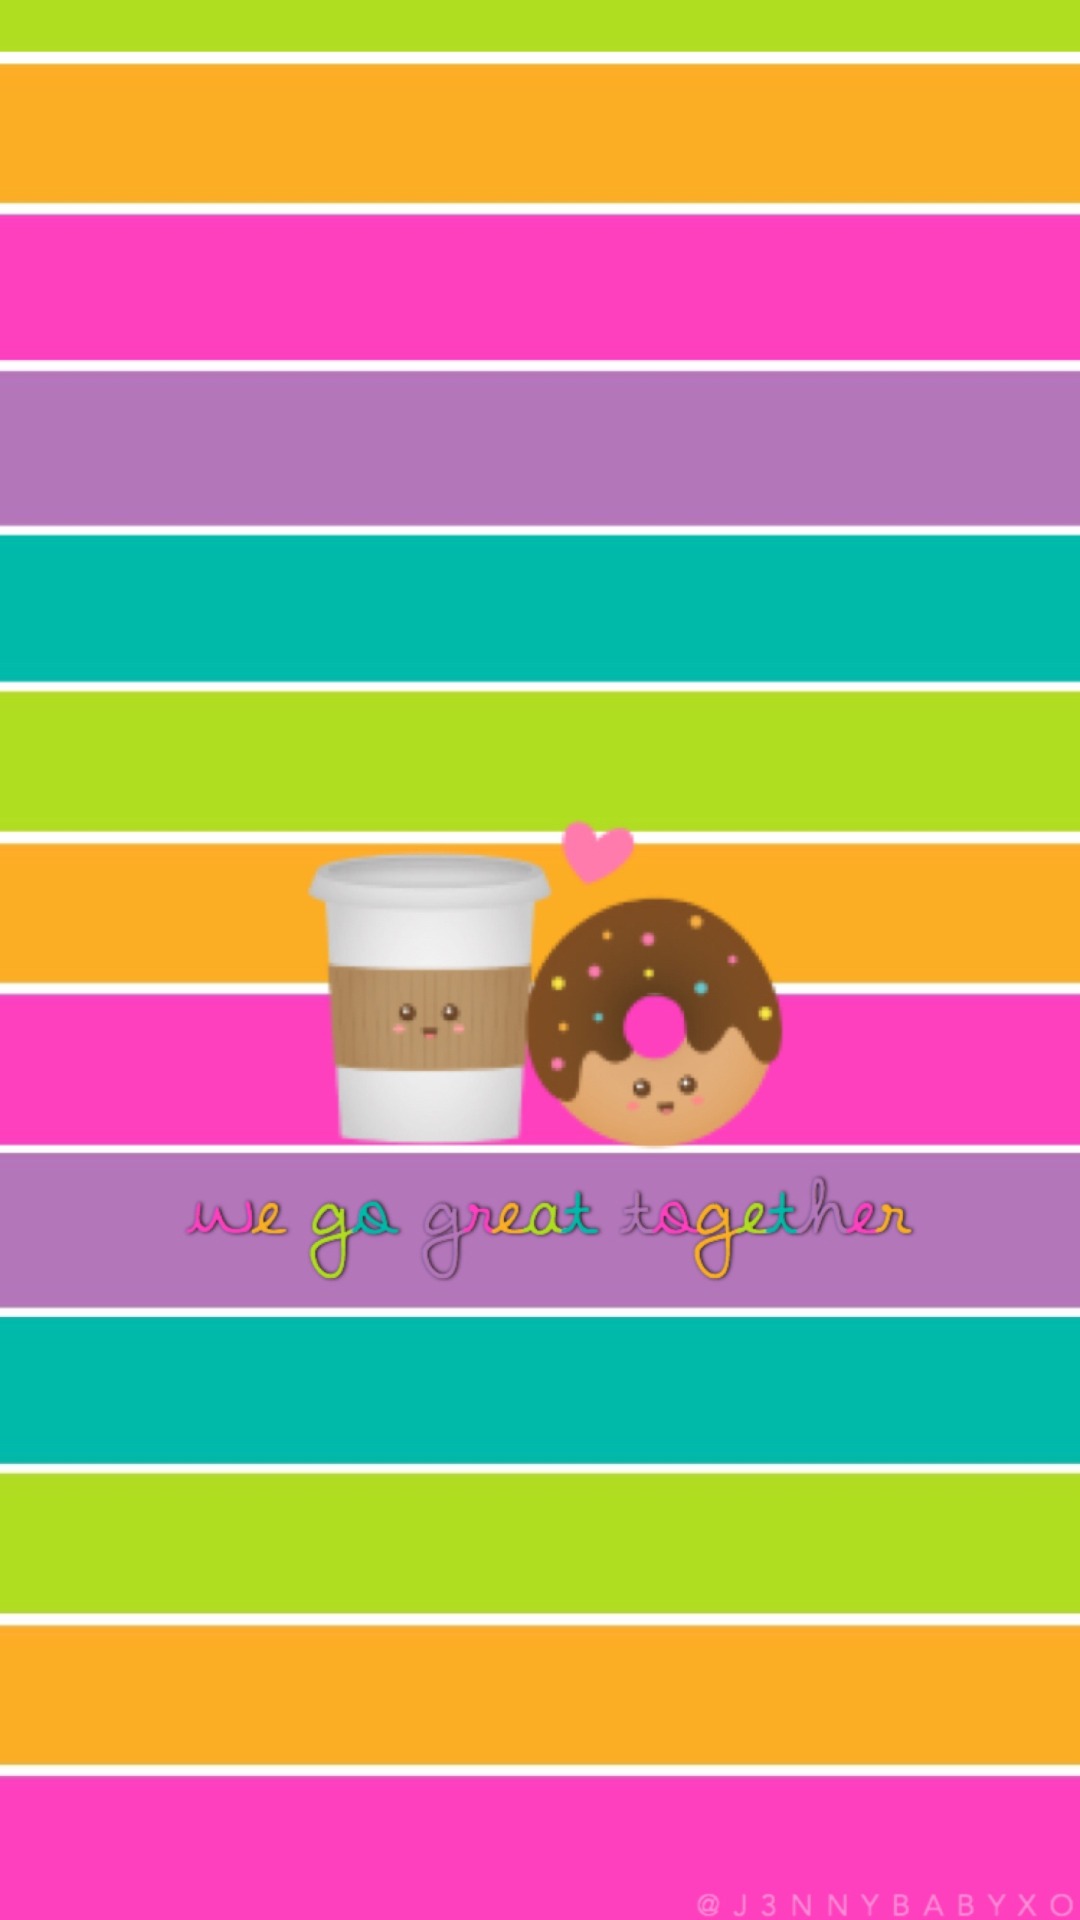 Cute Coffee & Donut Wallpaper Made By Me 💁🏻💖 Please - Graphic Design - HD Wallpaper 